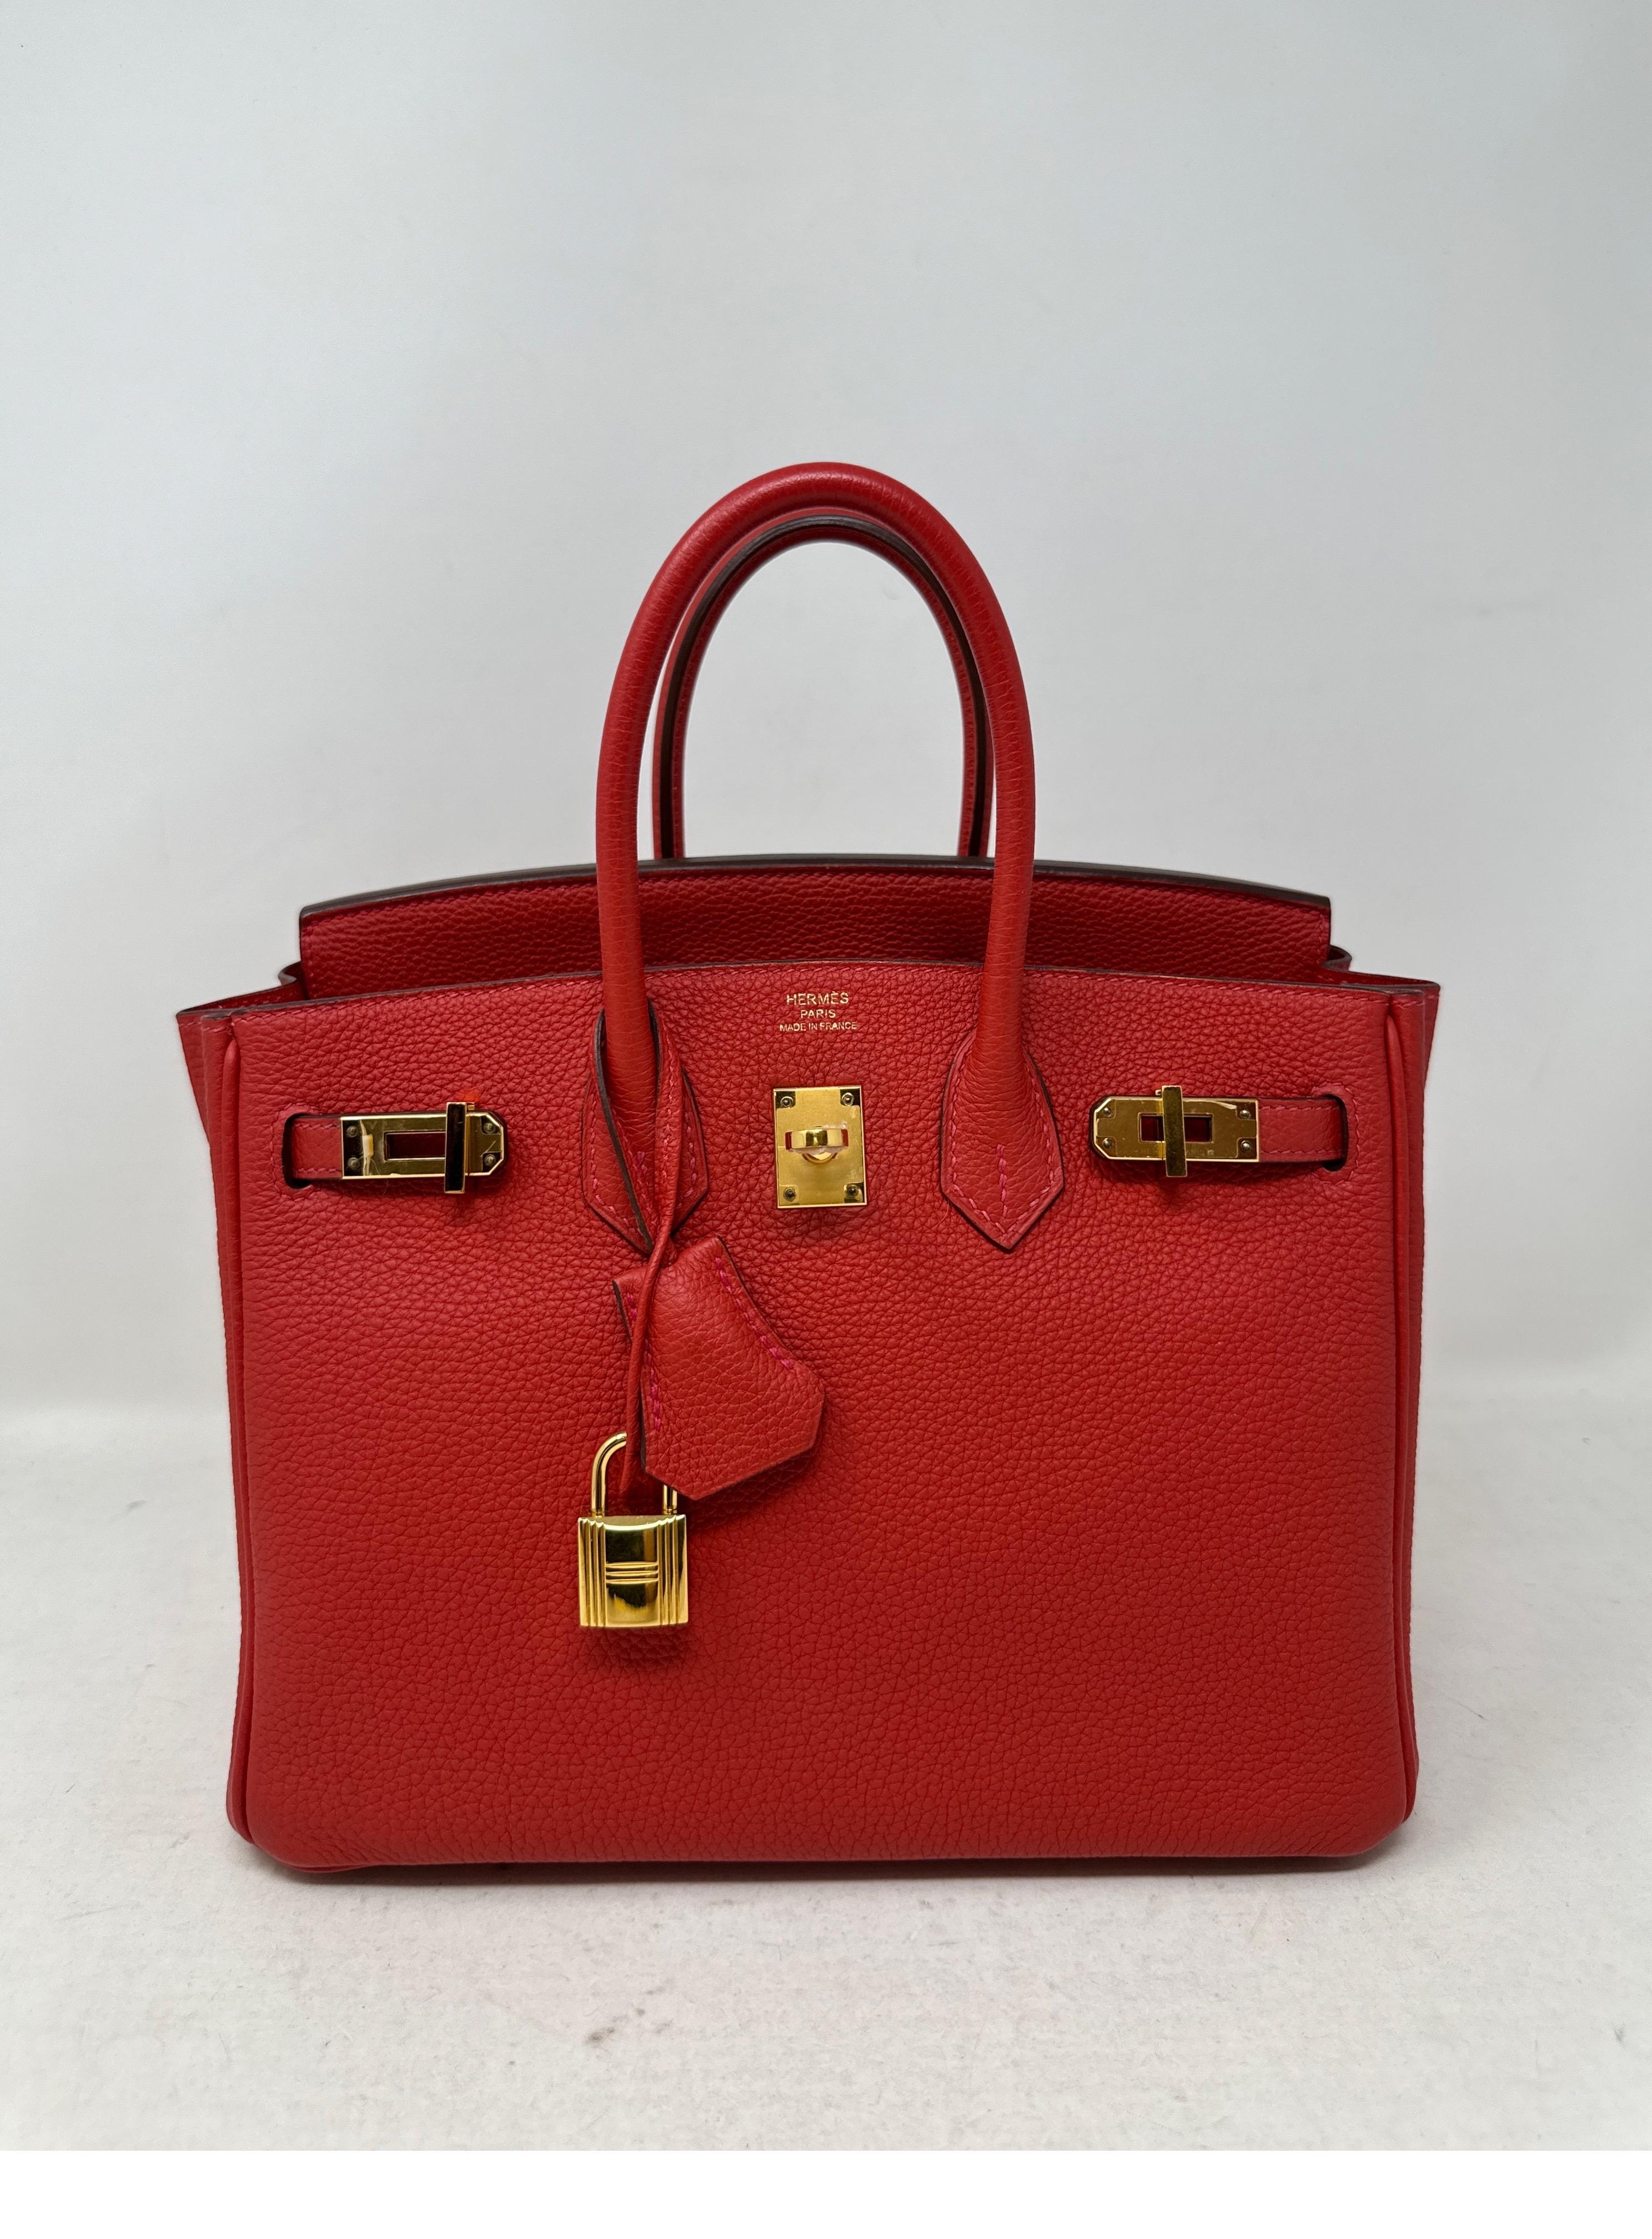 Hermes Rouge Pivoine Birkin 25 Bag. Beautiful red color with gold hardware. Togo leather. Looks like new condition. Excellent condition. Would make a perfect gift. Interior is mint. Plastic is still on the hardware. Full set includes clochette,